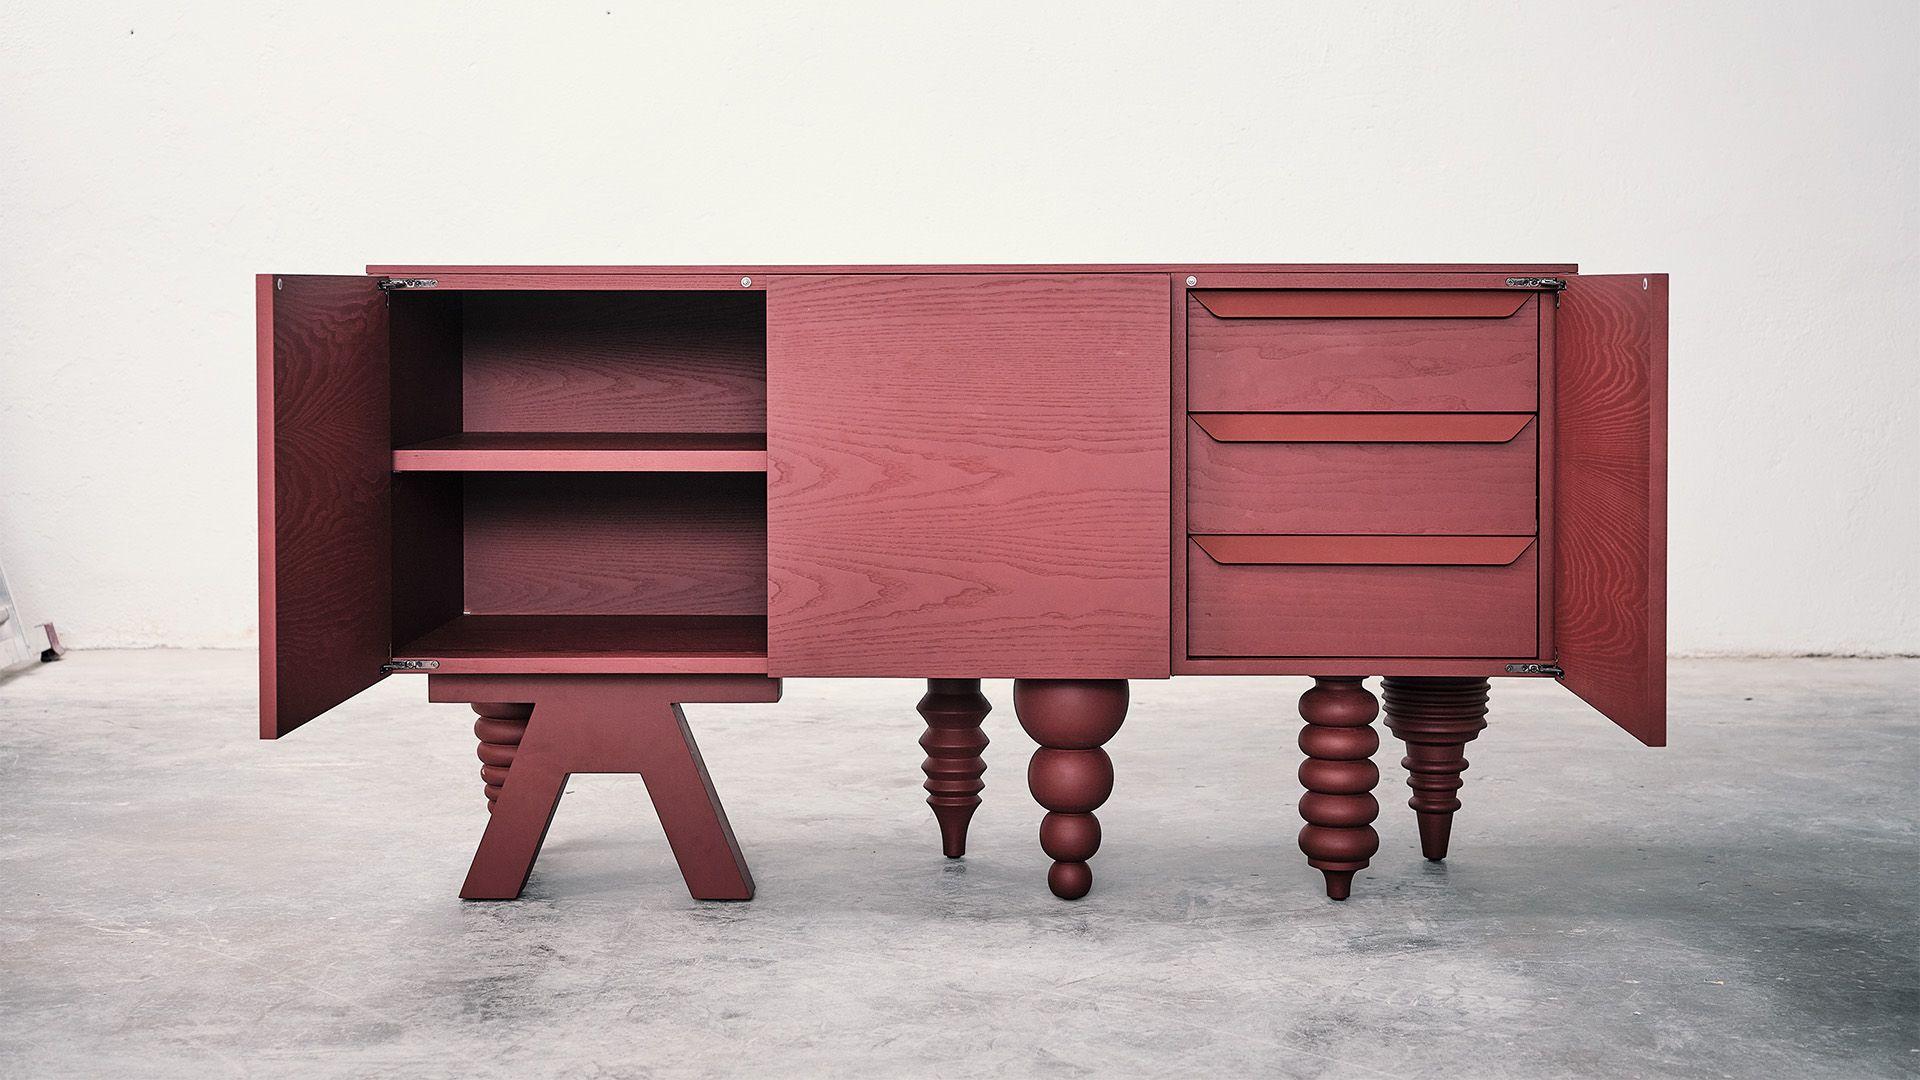 2M Multileg Cabinet in Red Ash by Jaime Hayon for BD Barcelona

It can be uniquely configured with twelve elaborate leg options, customisable finishes and colours, and a multitude of interior storage variations. The Multileg is disciplined and